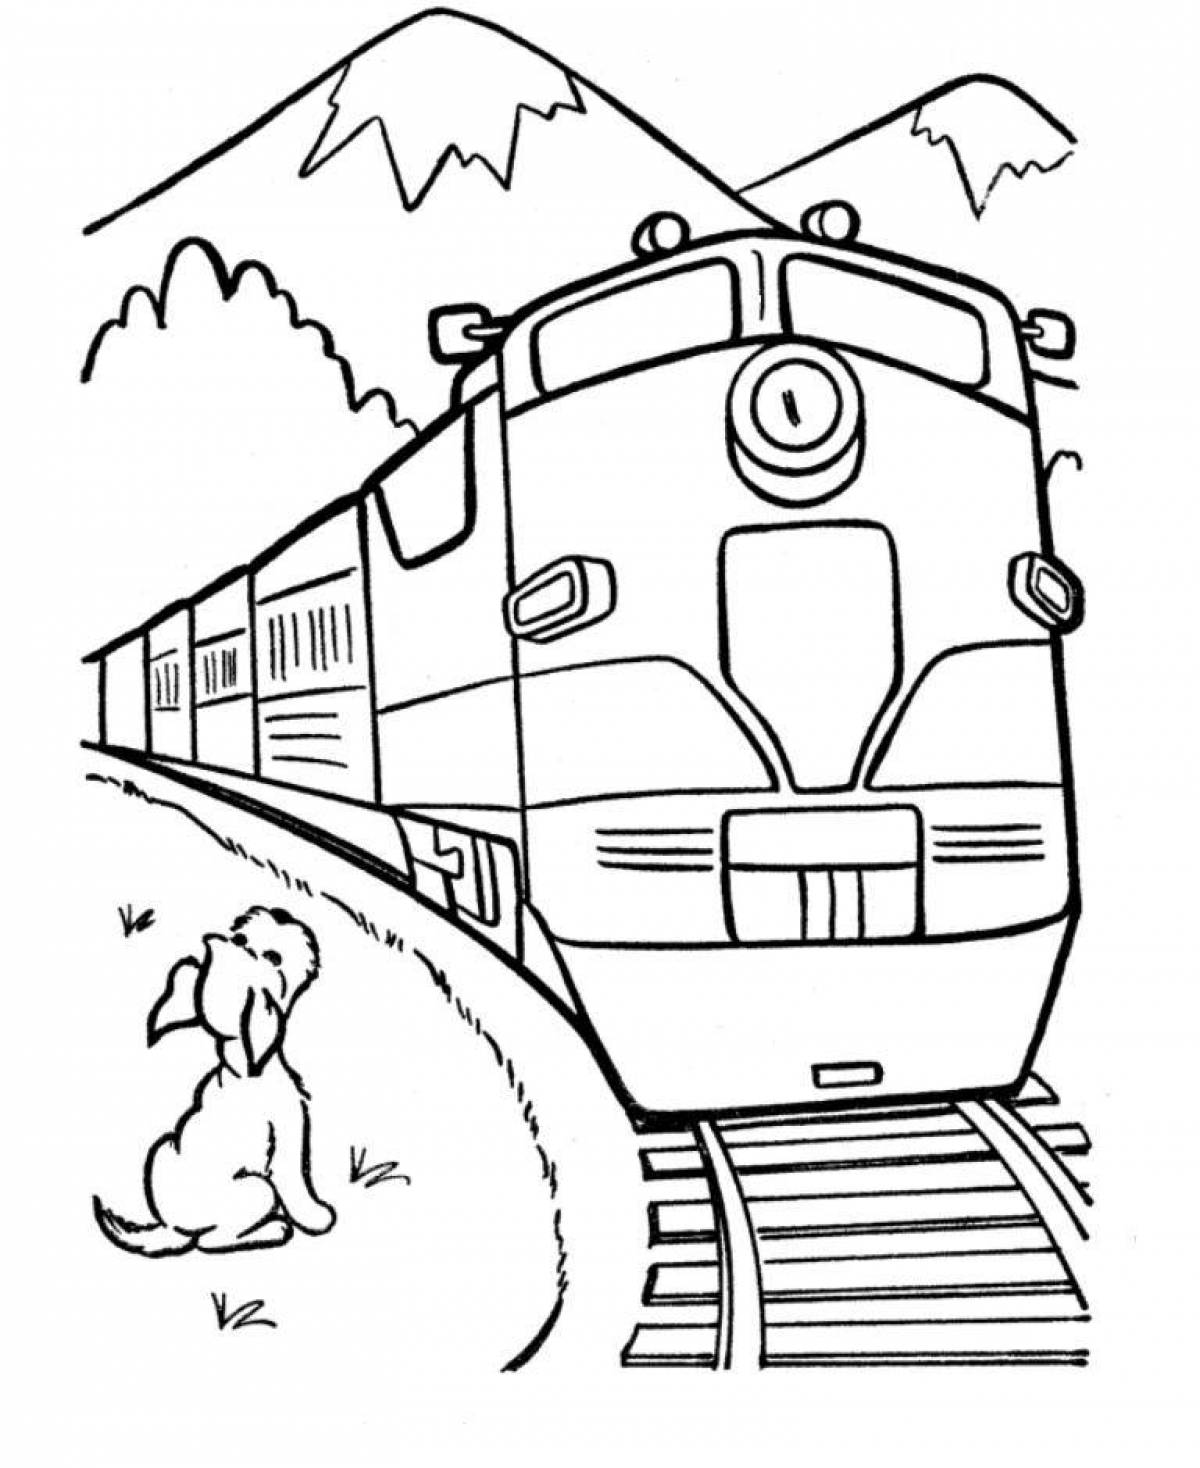 Coloring book magical electric train